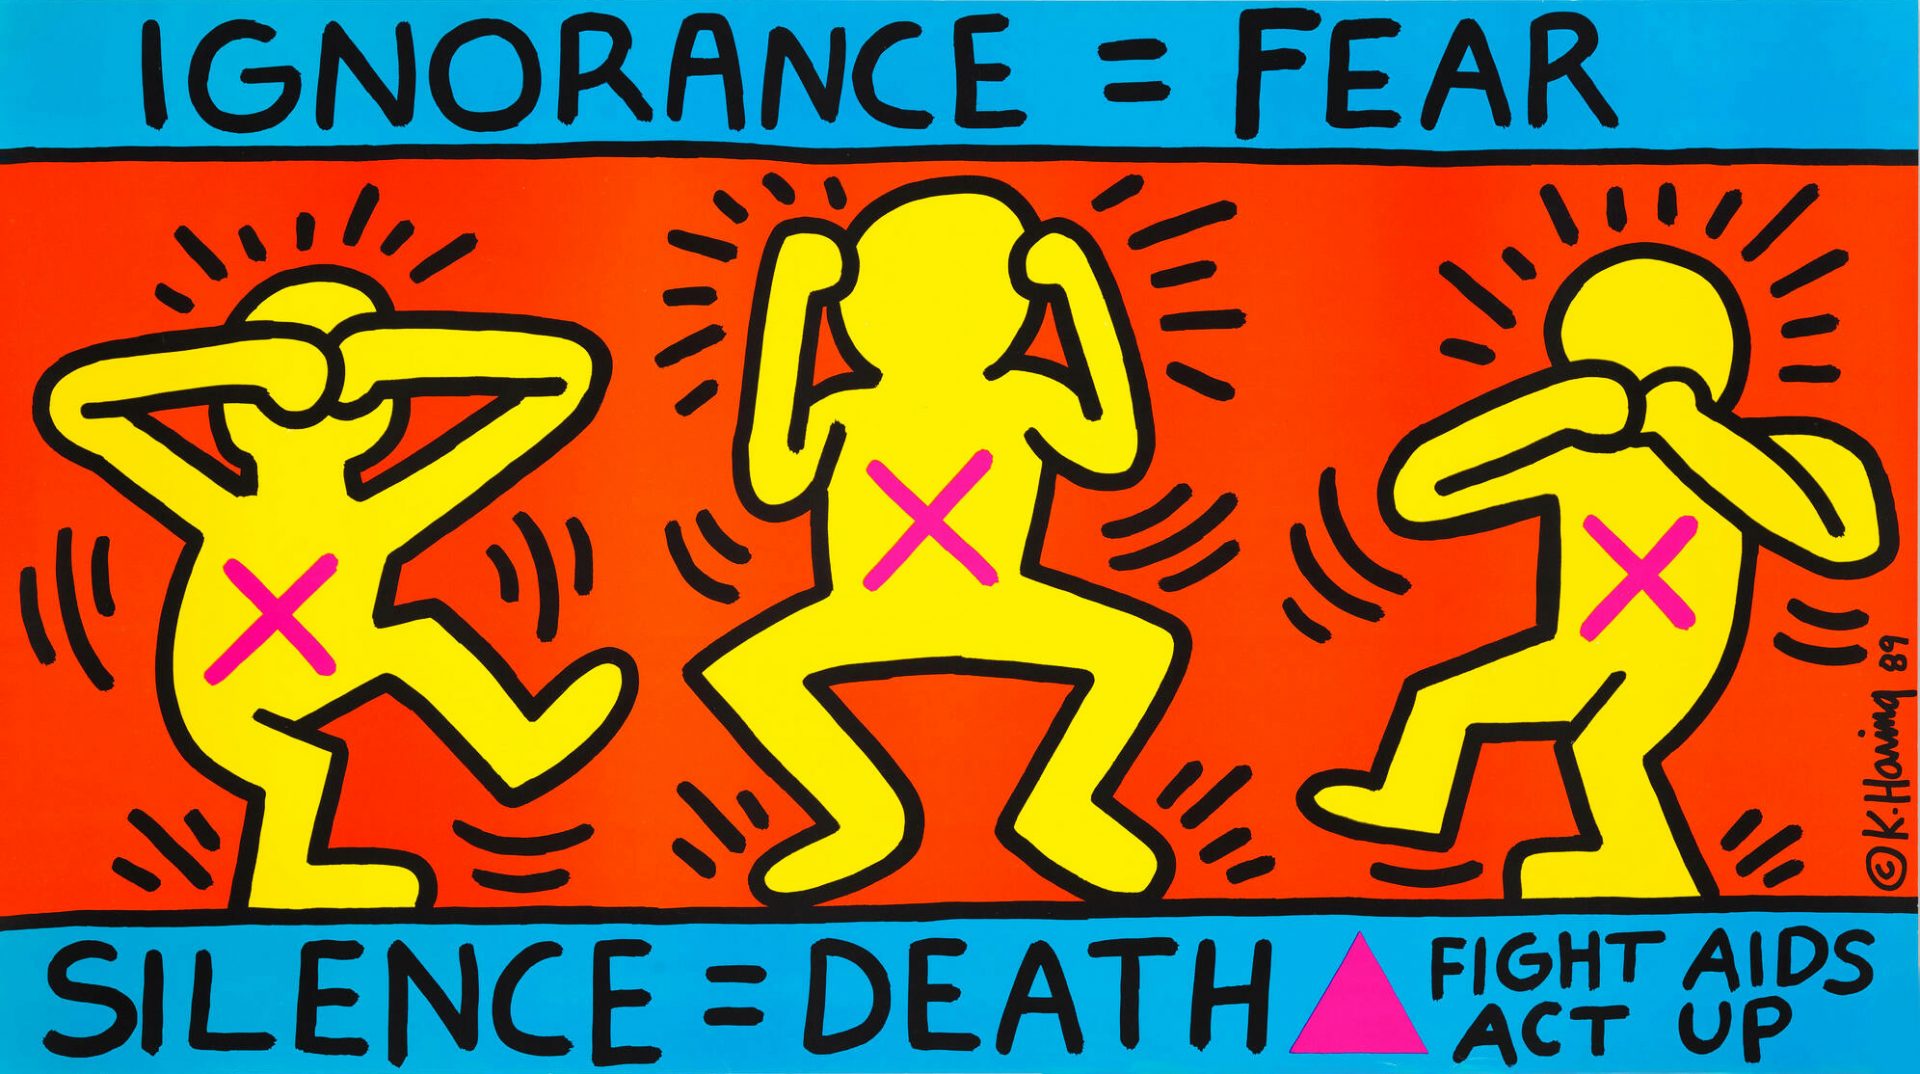 Artwork “Ignorance = Fear / Silence = Death” by Keith Haring. A bright, vibrant poster featuring three yellow figures against an orange background. Each figure has a pink 'X' across its chest and is depicted in a pose covering its ears, eyes, and mouth respectively. Above the figures, in bold lettering, is the text 'IGNORANCE = FEAR'. Below the figures is the text 'SILENCE = DEATH' in blue, followed by 'FIGHT AIDS ACT UP' with a pink triangle symbol. The artwork conveys a strong message about the AIDS crisis.